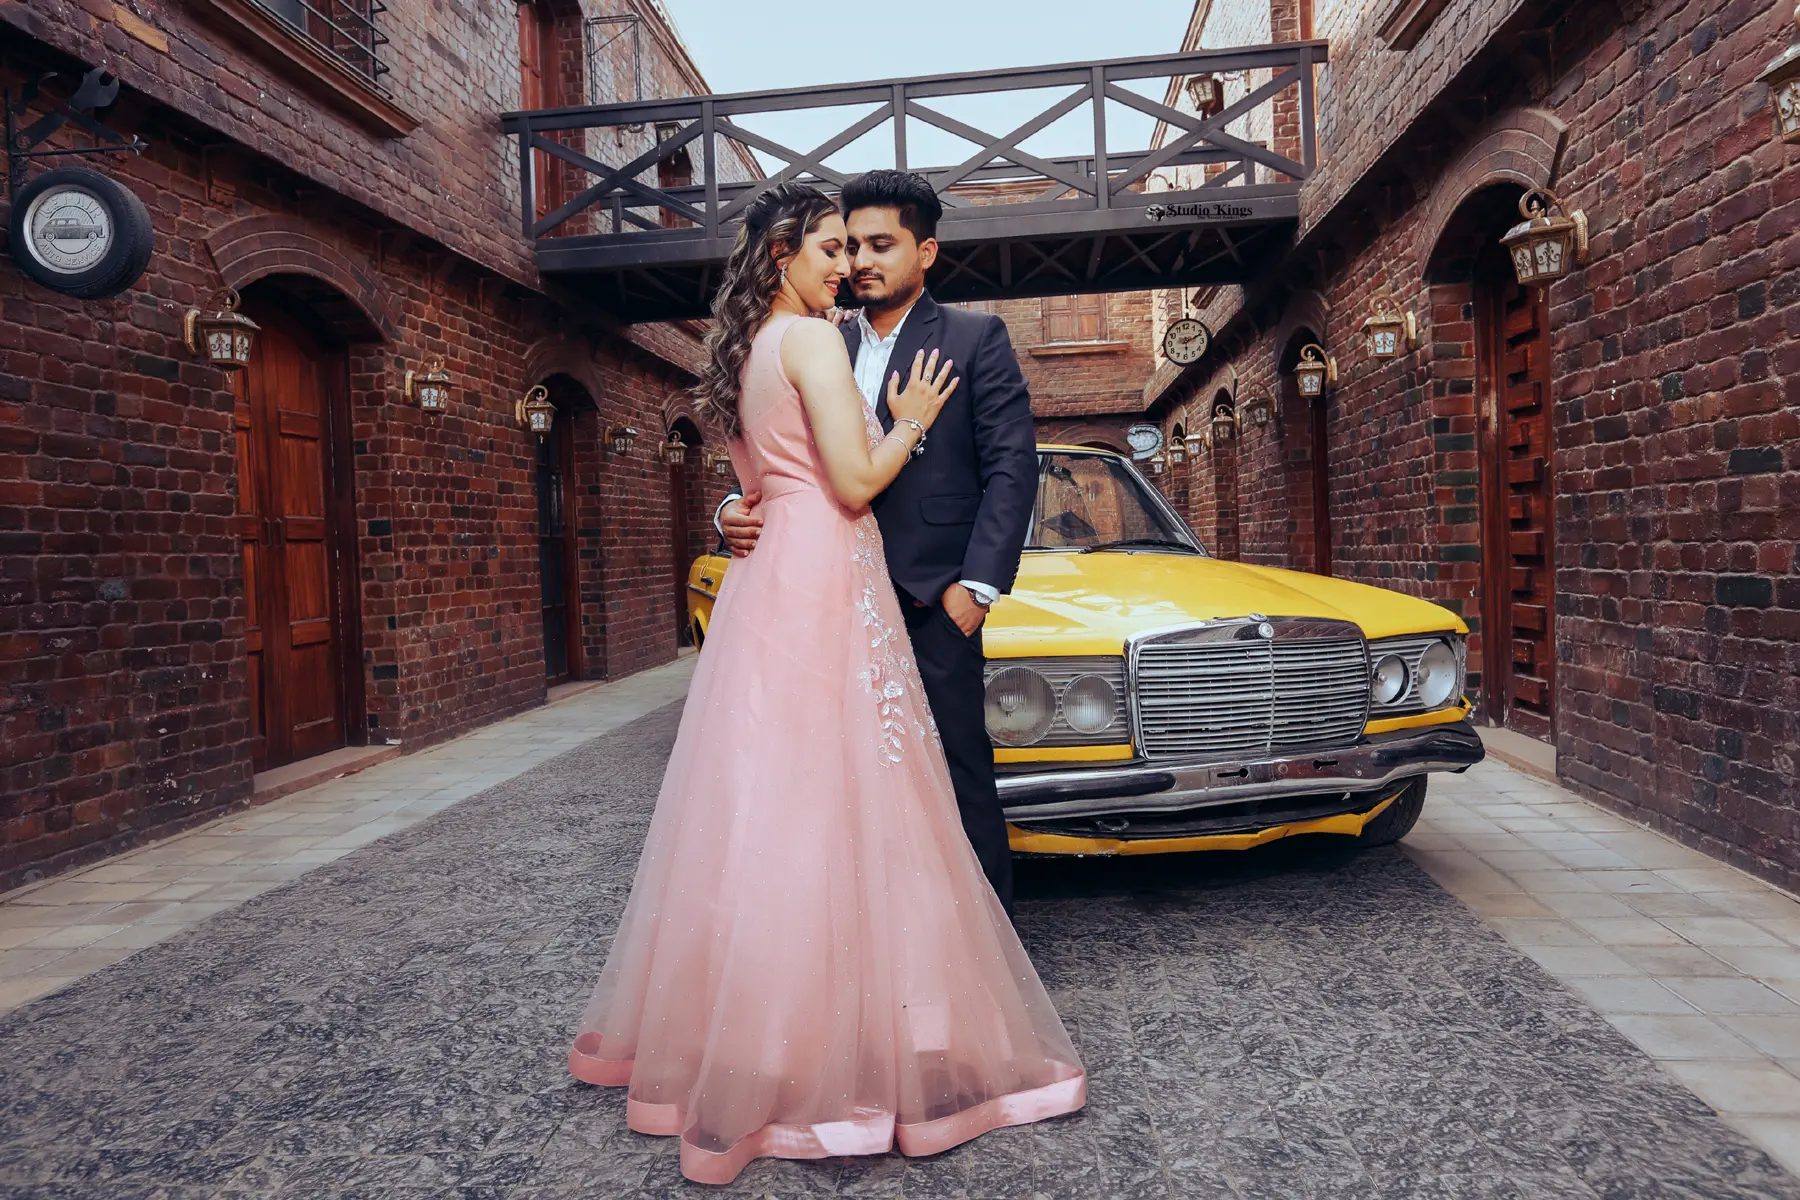 Discover love in the city of Chandigarh through a stunning pre-wedding portrait. Studio Kings Wedding Photography captures the romance and urban charm of the city.